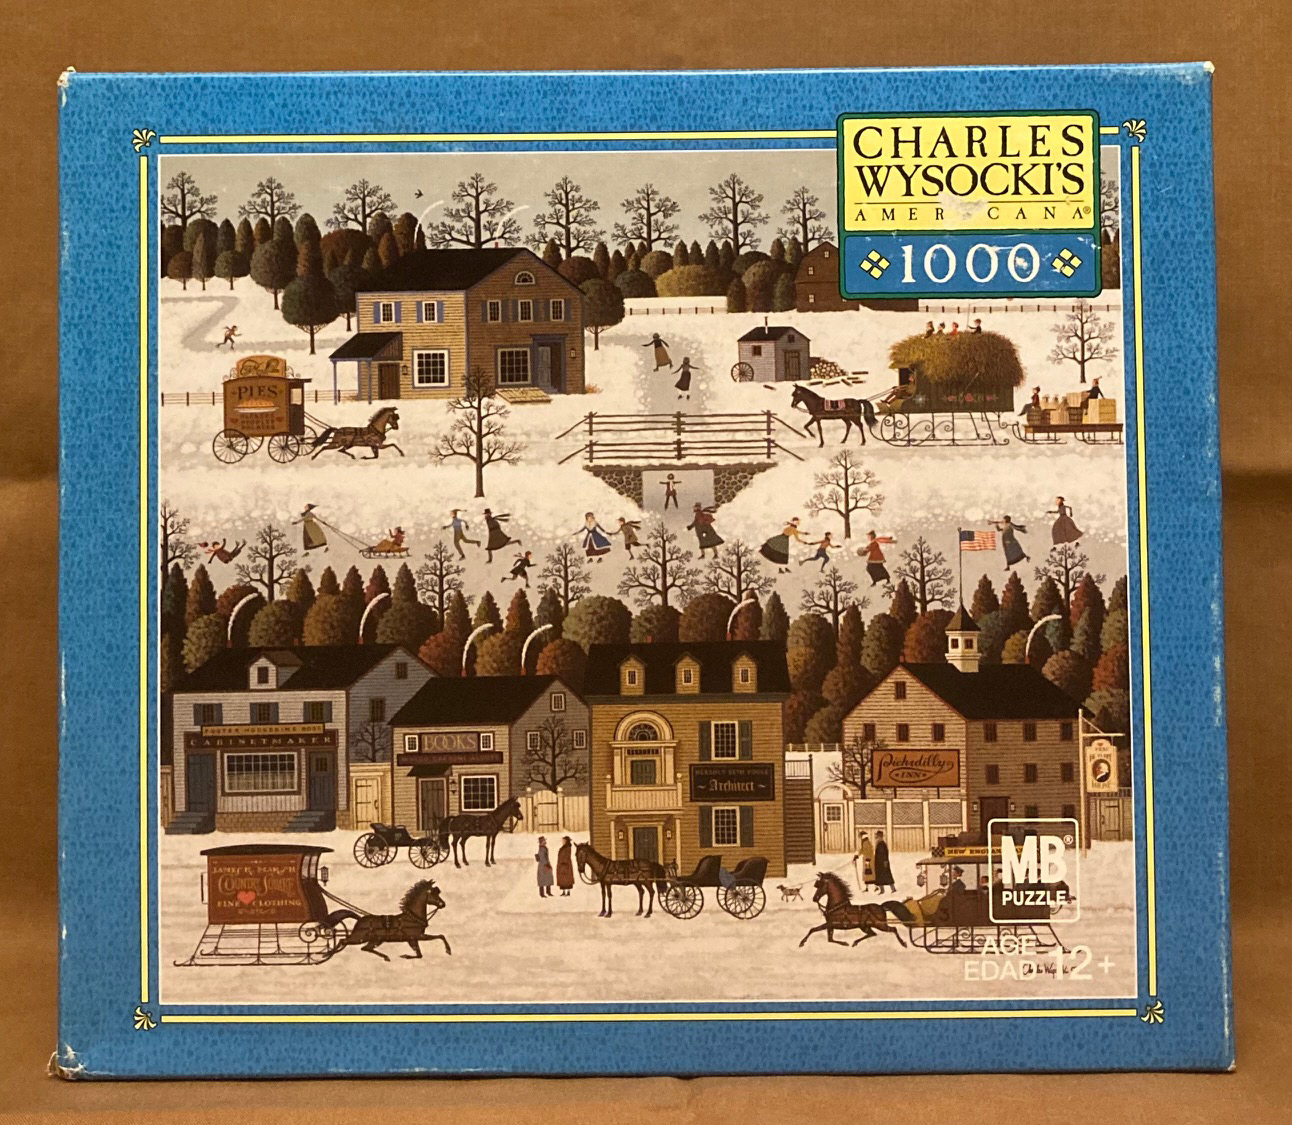 Primary image for Charles Wysocki puzzle Windjammer Canal 1000 pc Milton Bradley 2005 04679-S36